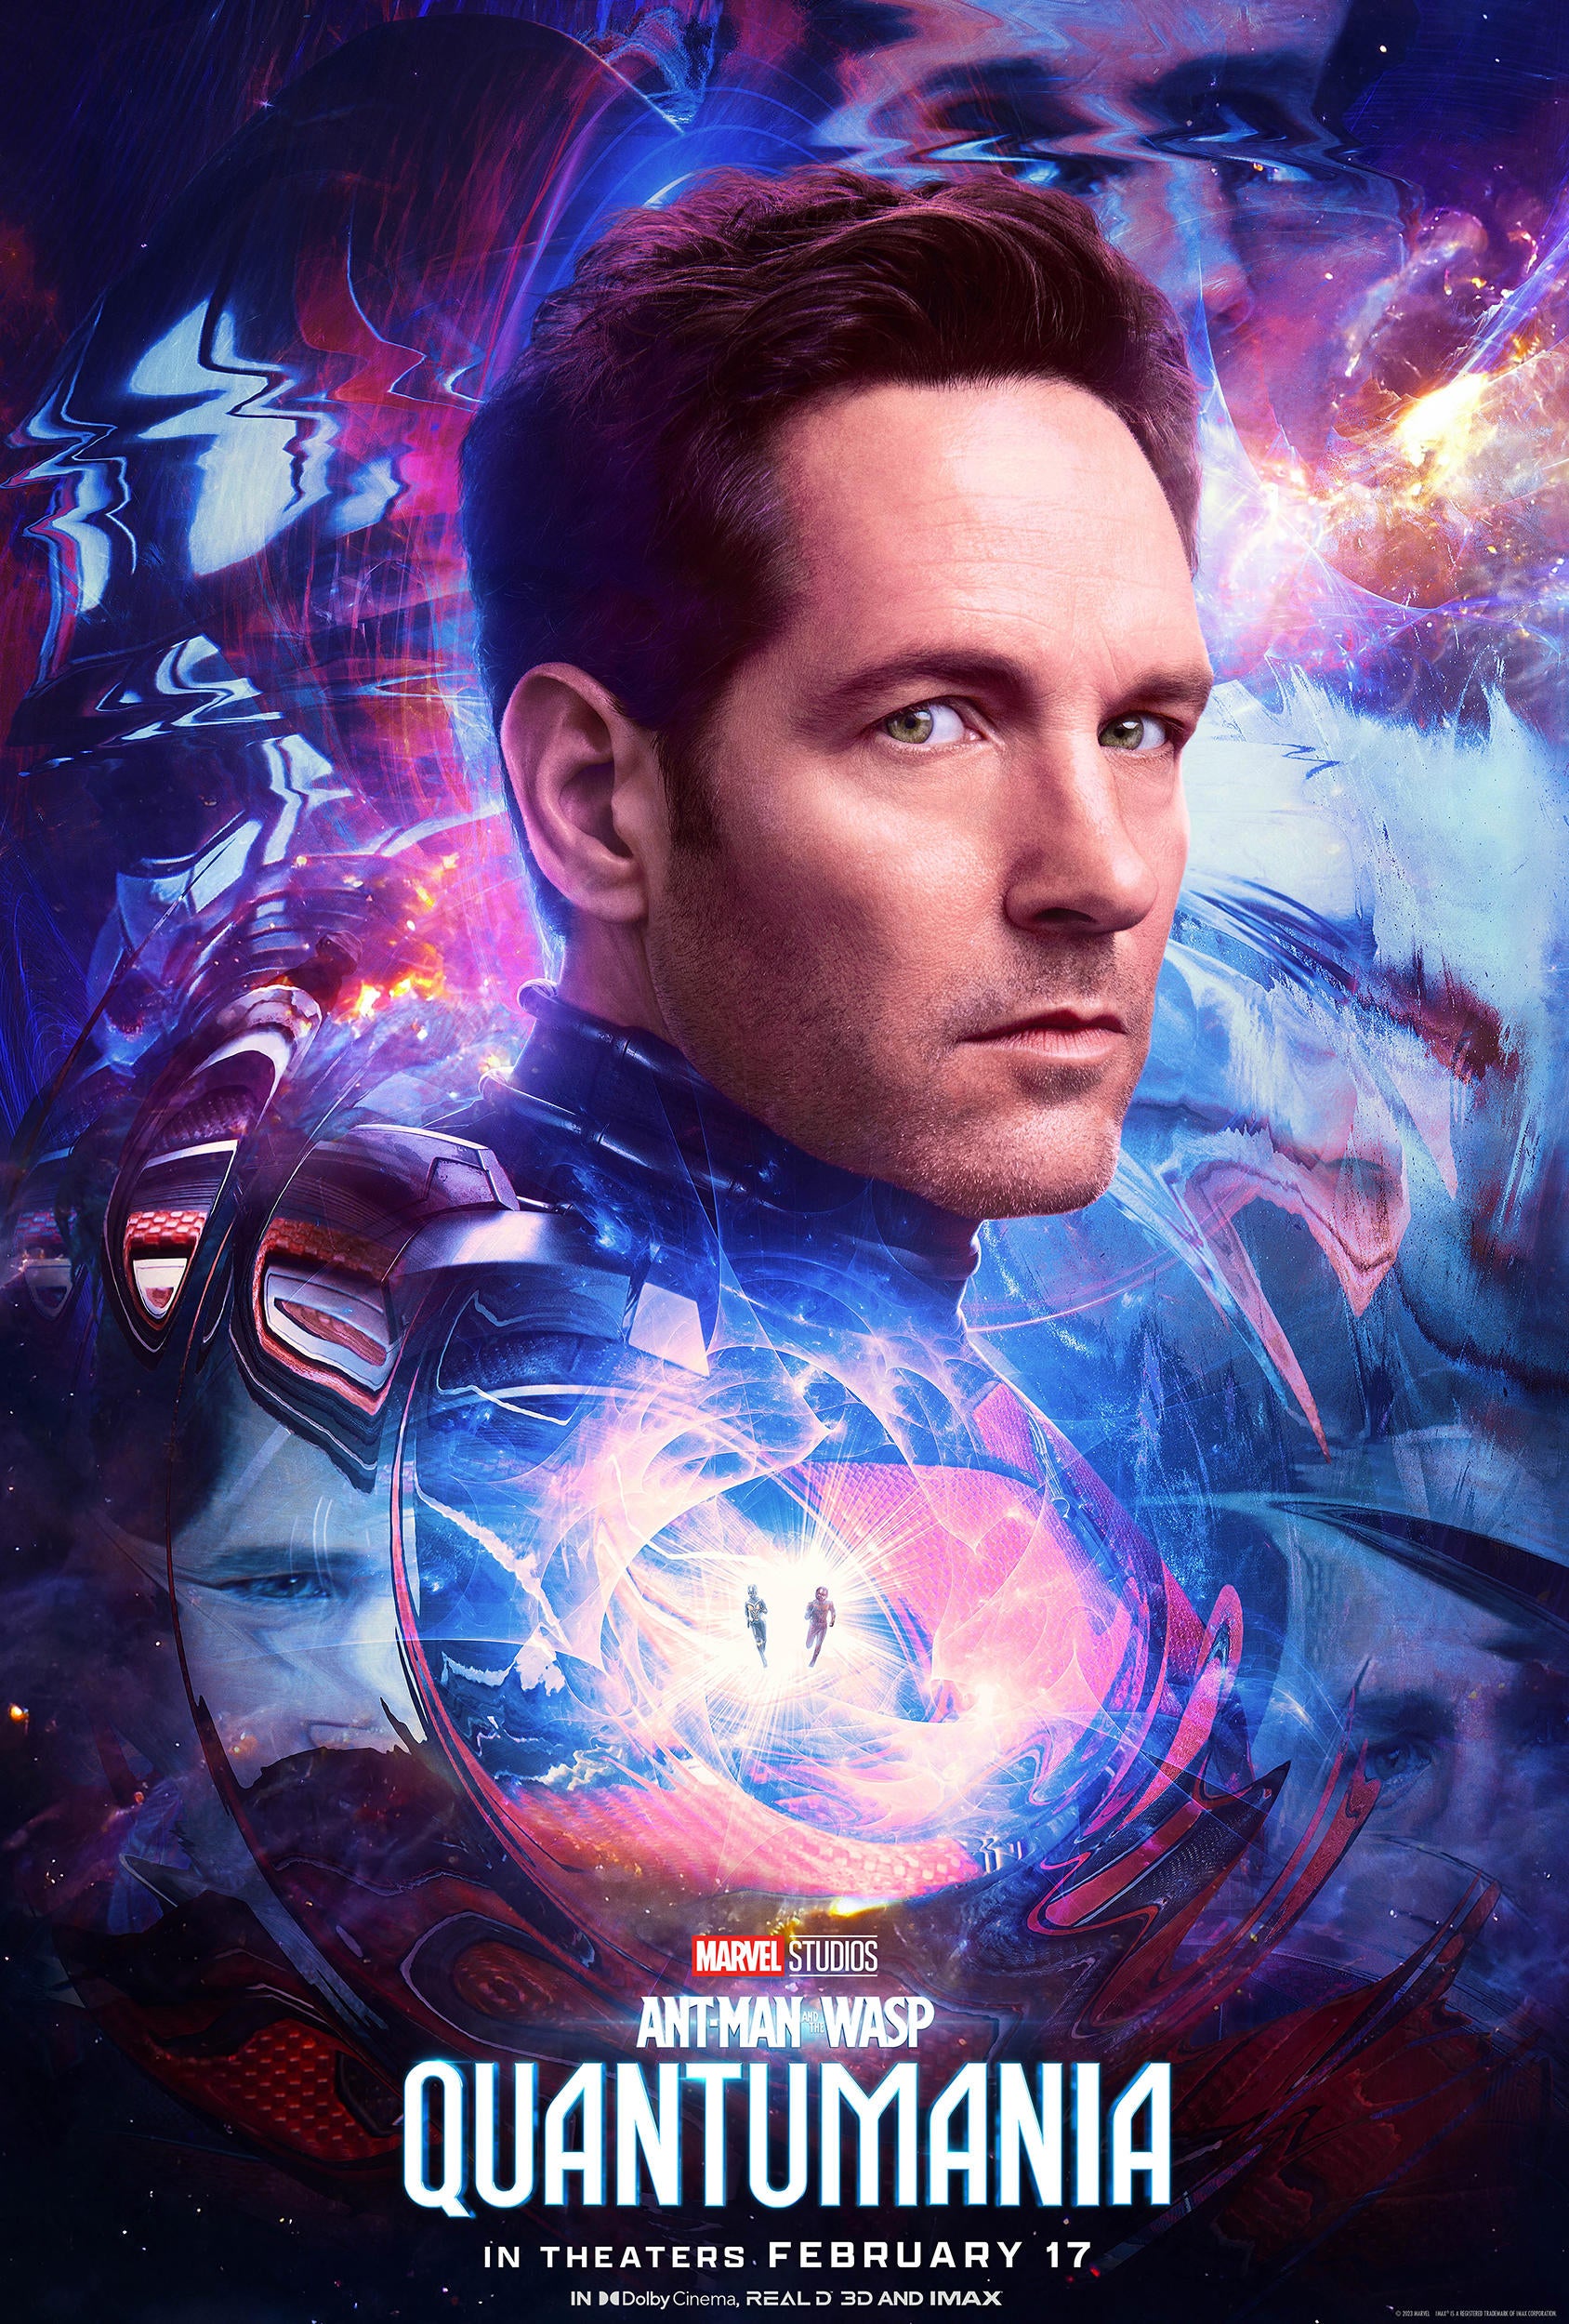 Ant-Man and the Wasp: Quantumania Character Posters Released